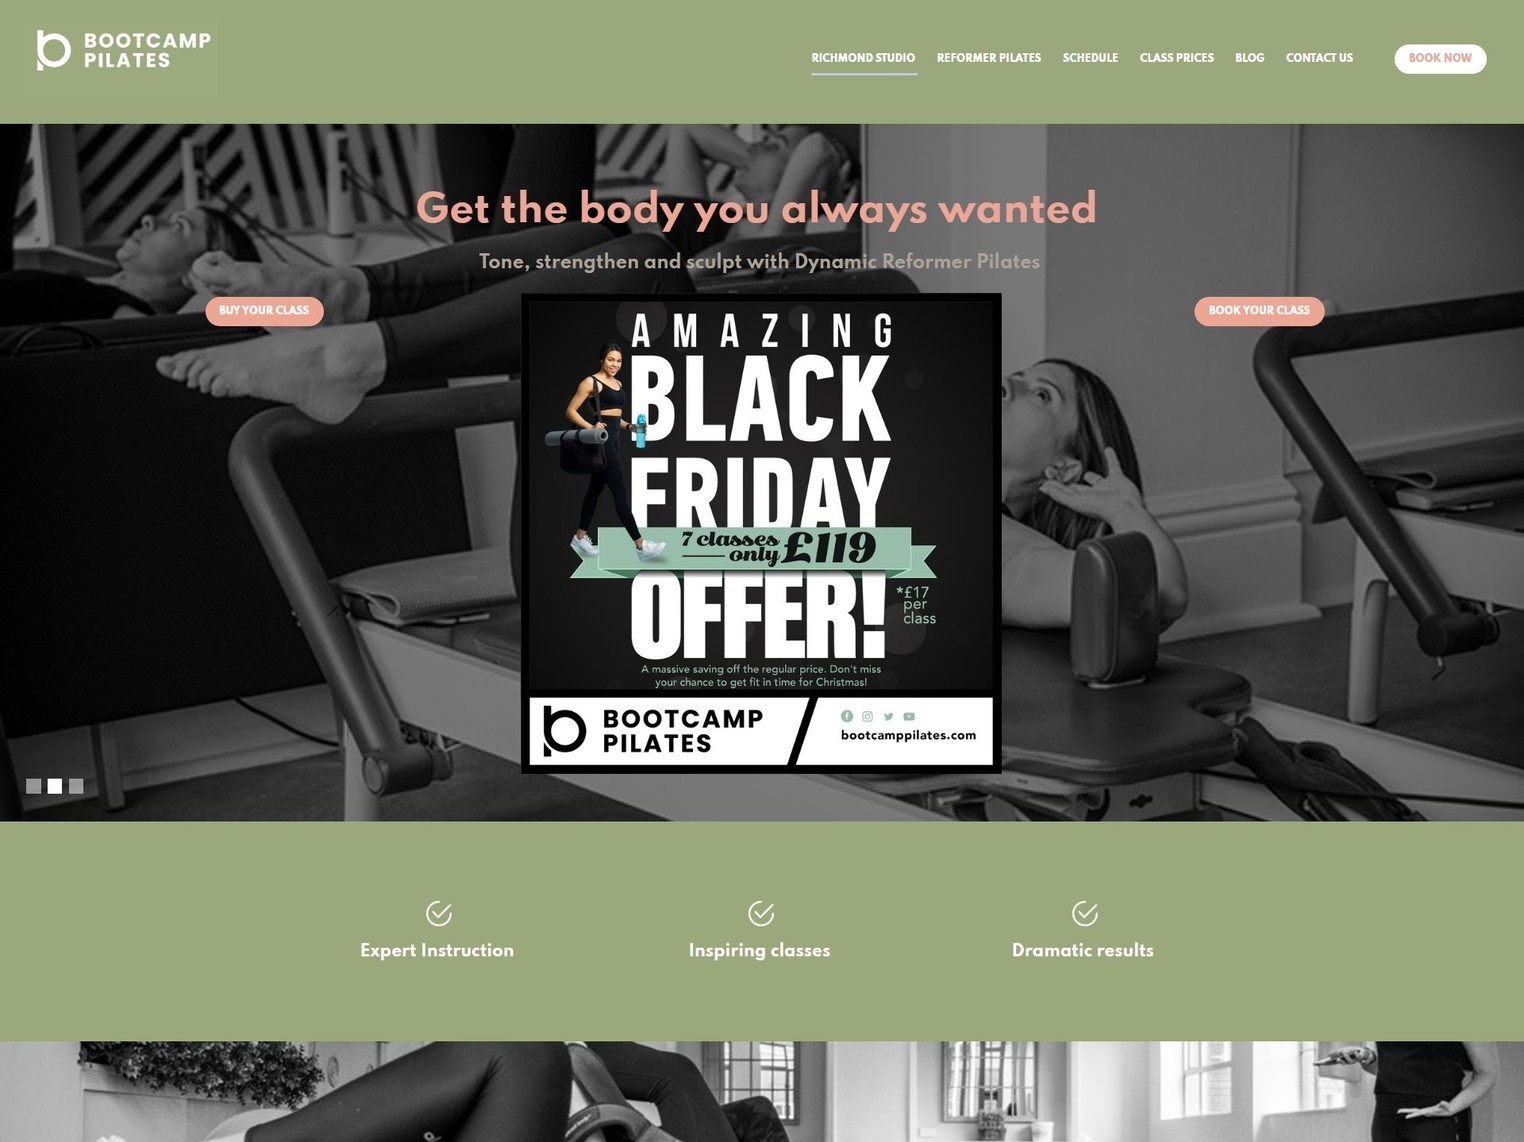 The new Bootcamp Pilates website, designed by it'seeze, shown on desktop